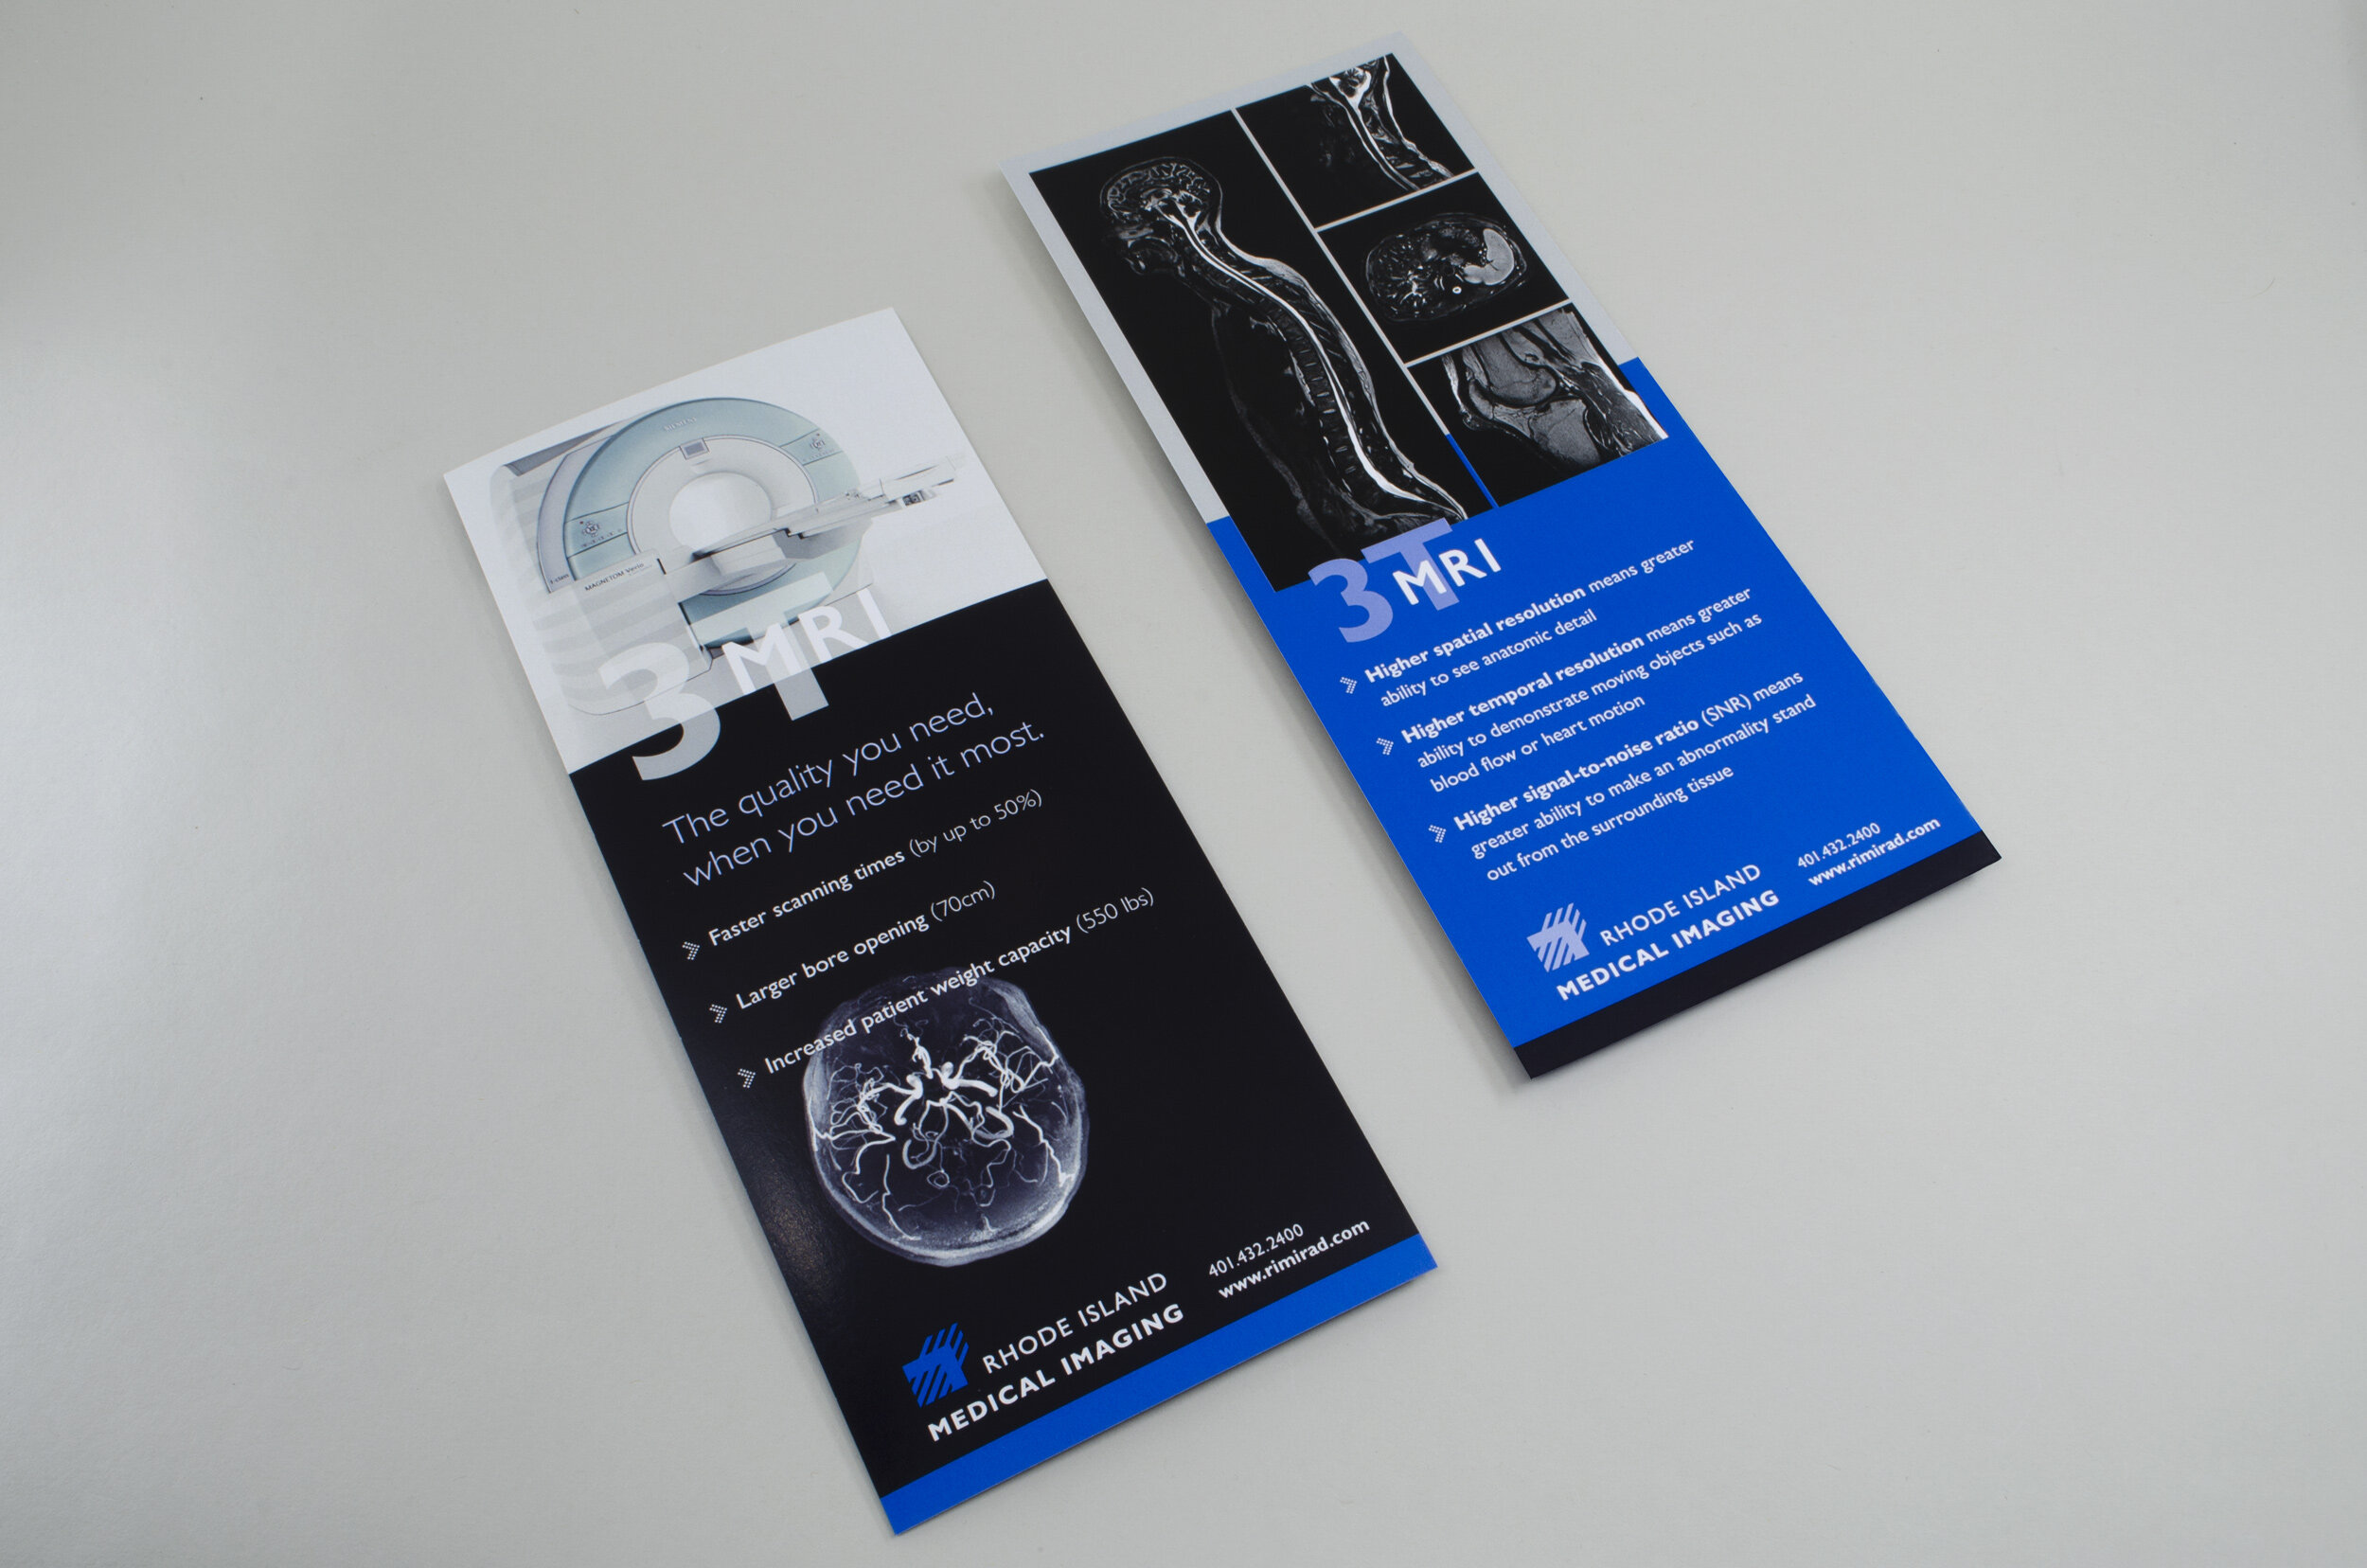   MRI capabilities flyer  • designer: Michael Balint • copy and direction: Acadia Consulting Group 